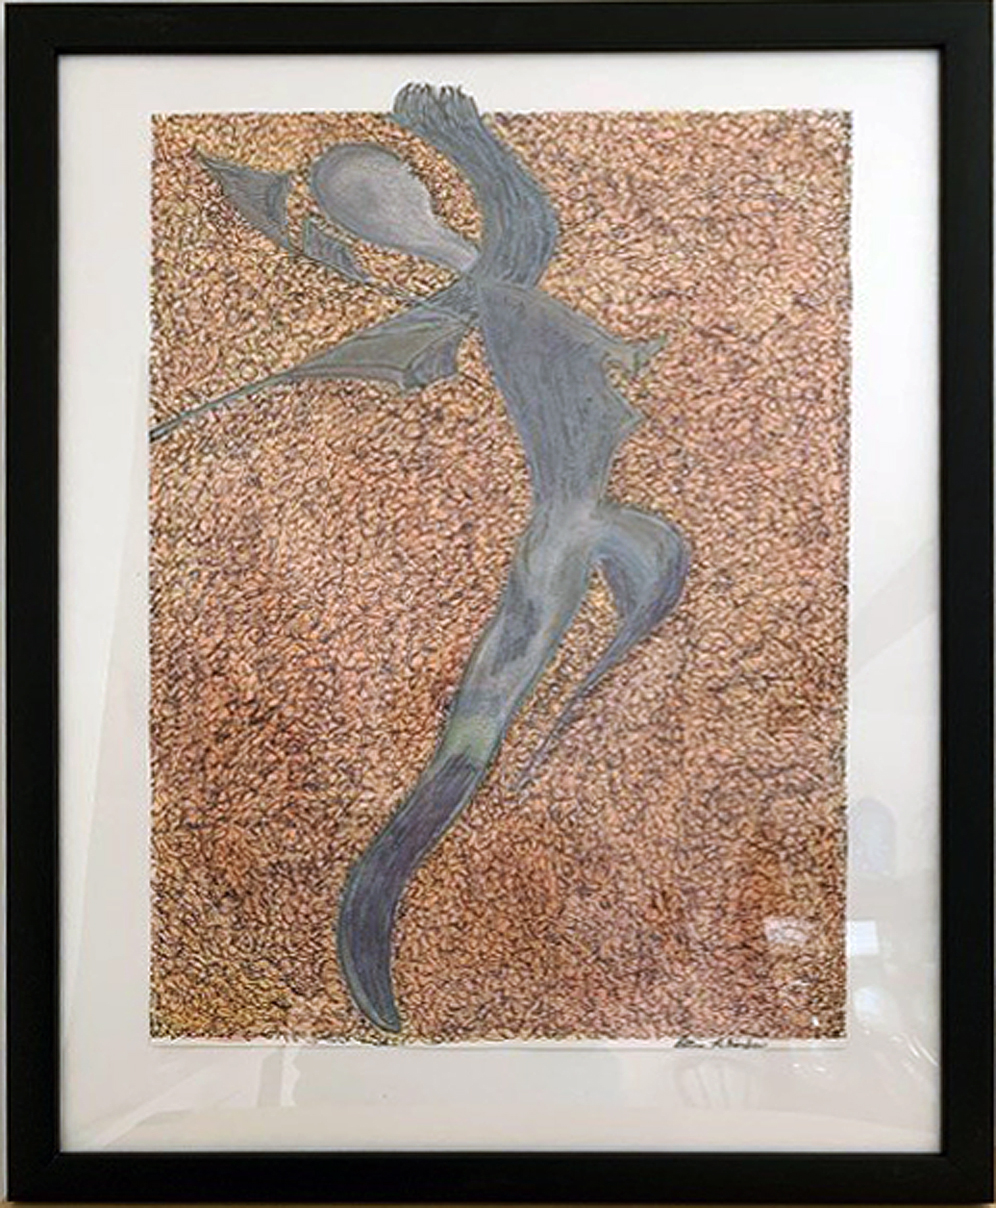 Ellen Rebarber “Out of the Shadow” oil pastel, ink, paint, framed size 18” W x 24”H, $300.00